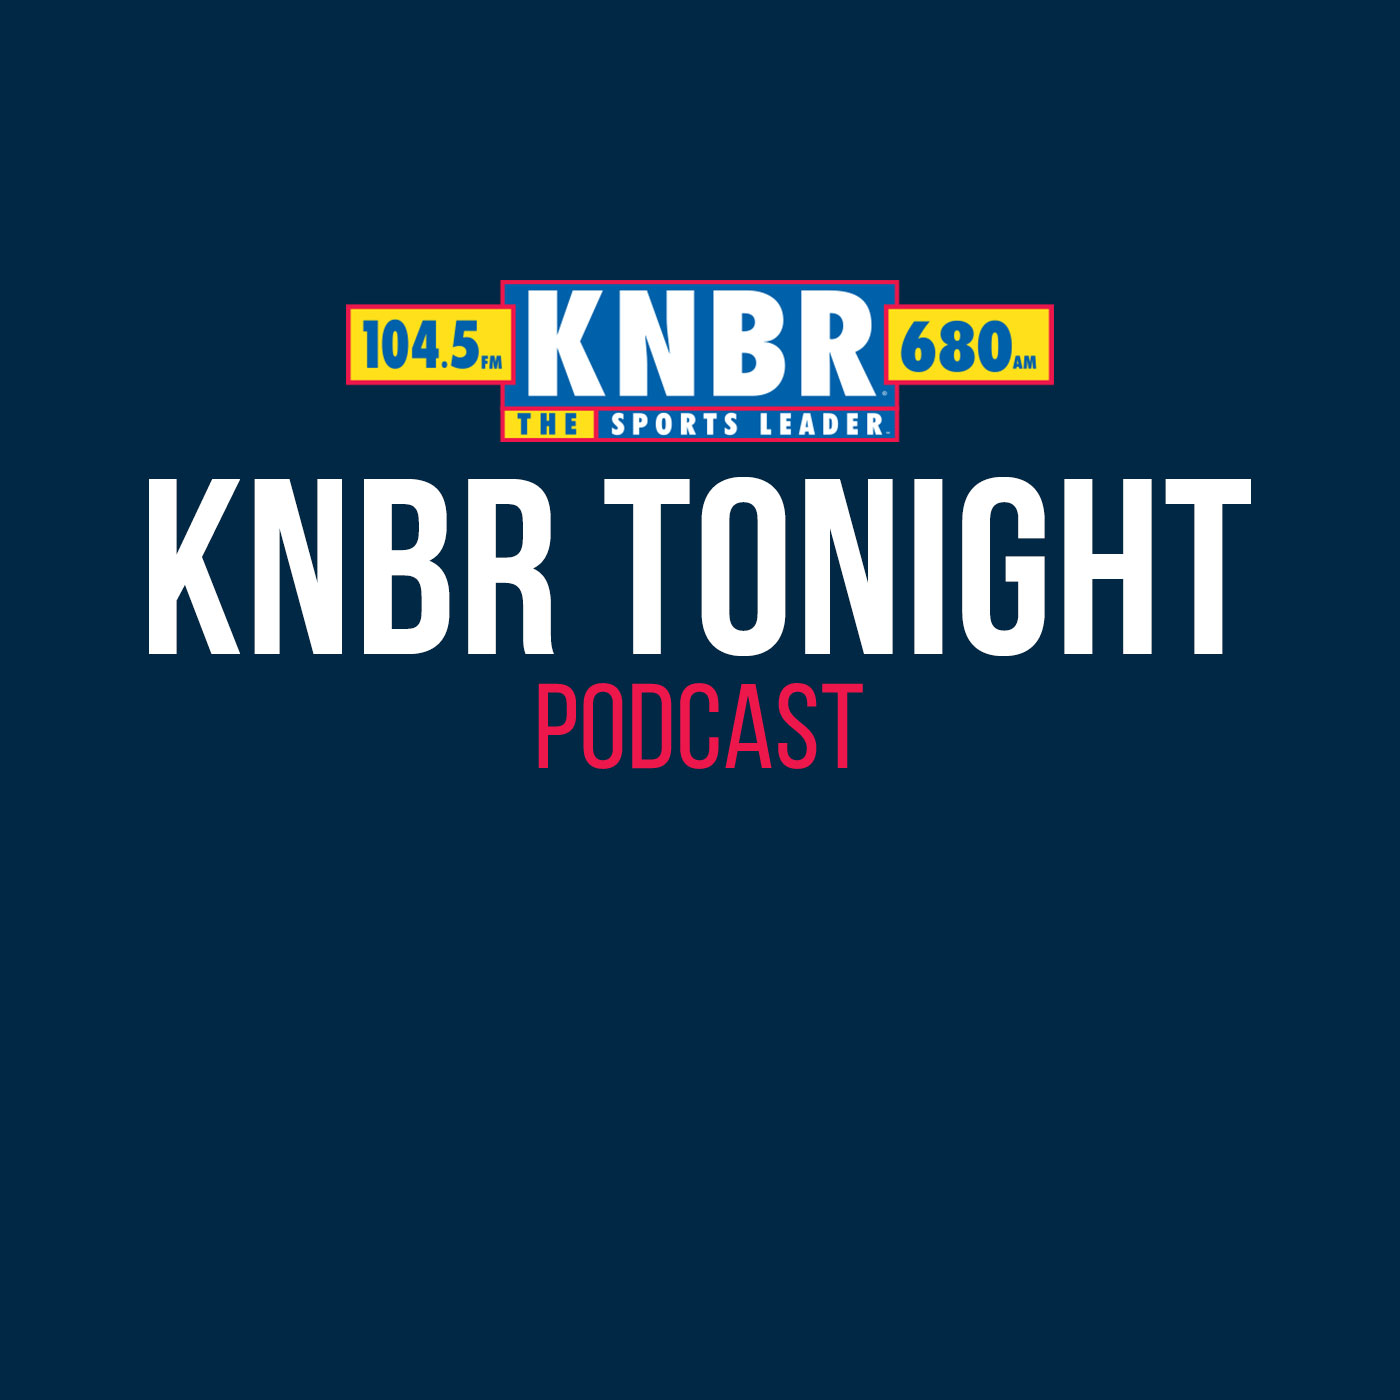 2-18 Dan Favale joins KNBR Tonight with Dieter to talk about the latest NBA/Warriors news as we head to the All-Star break